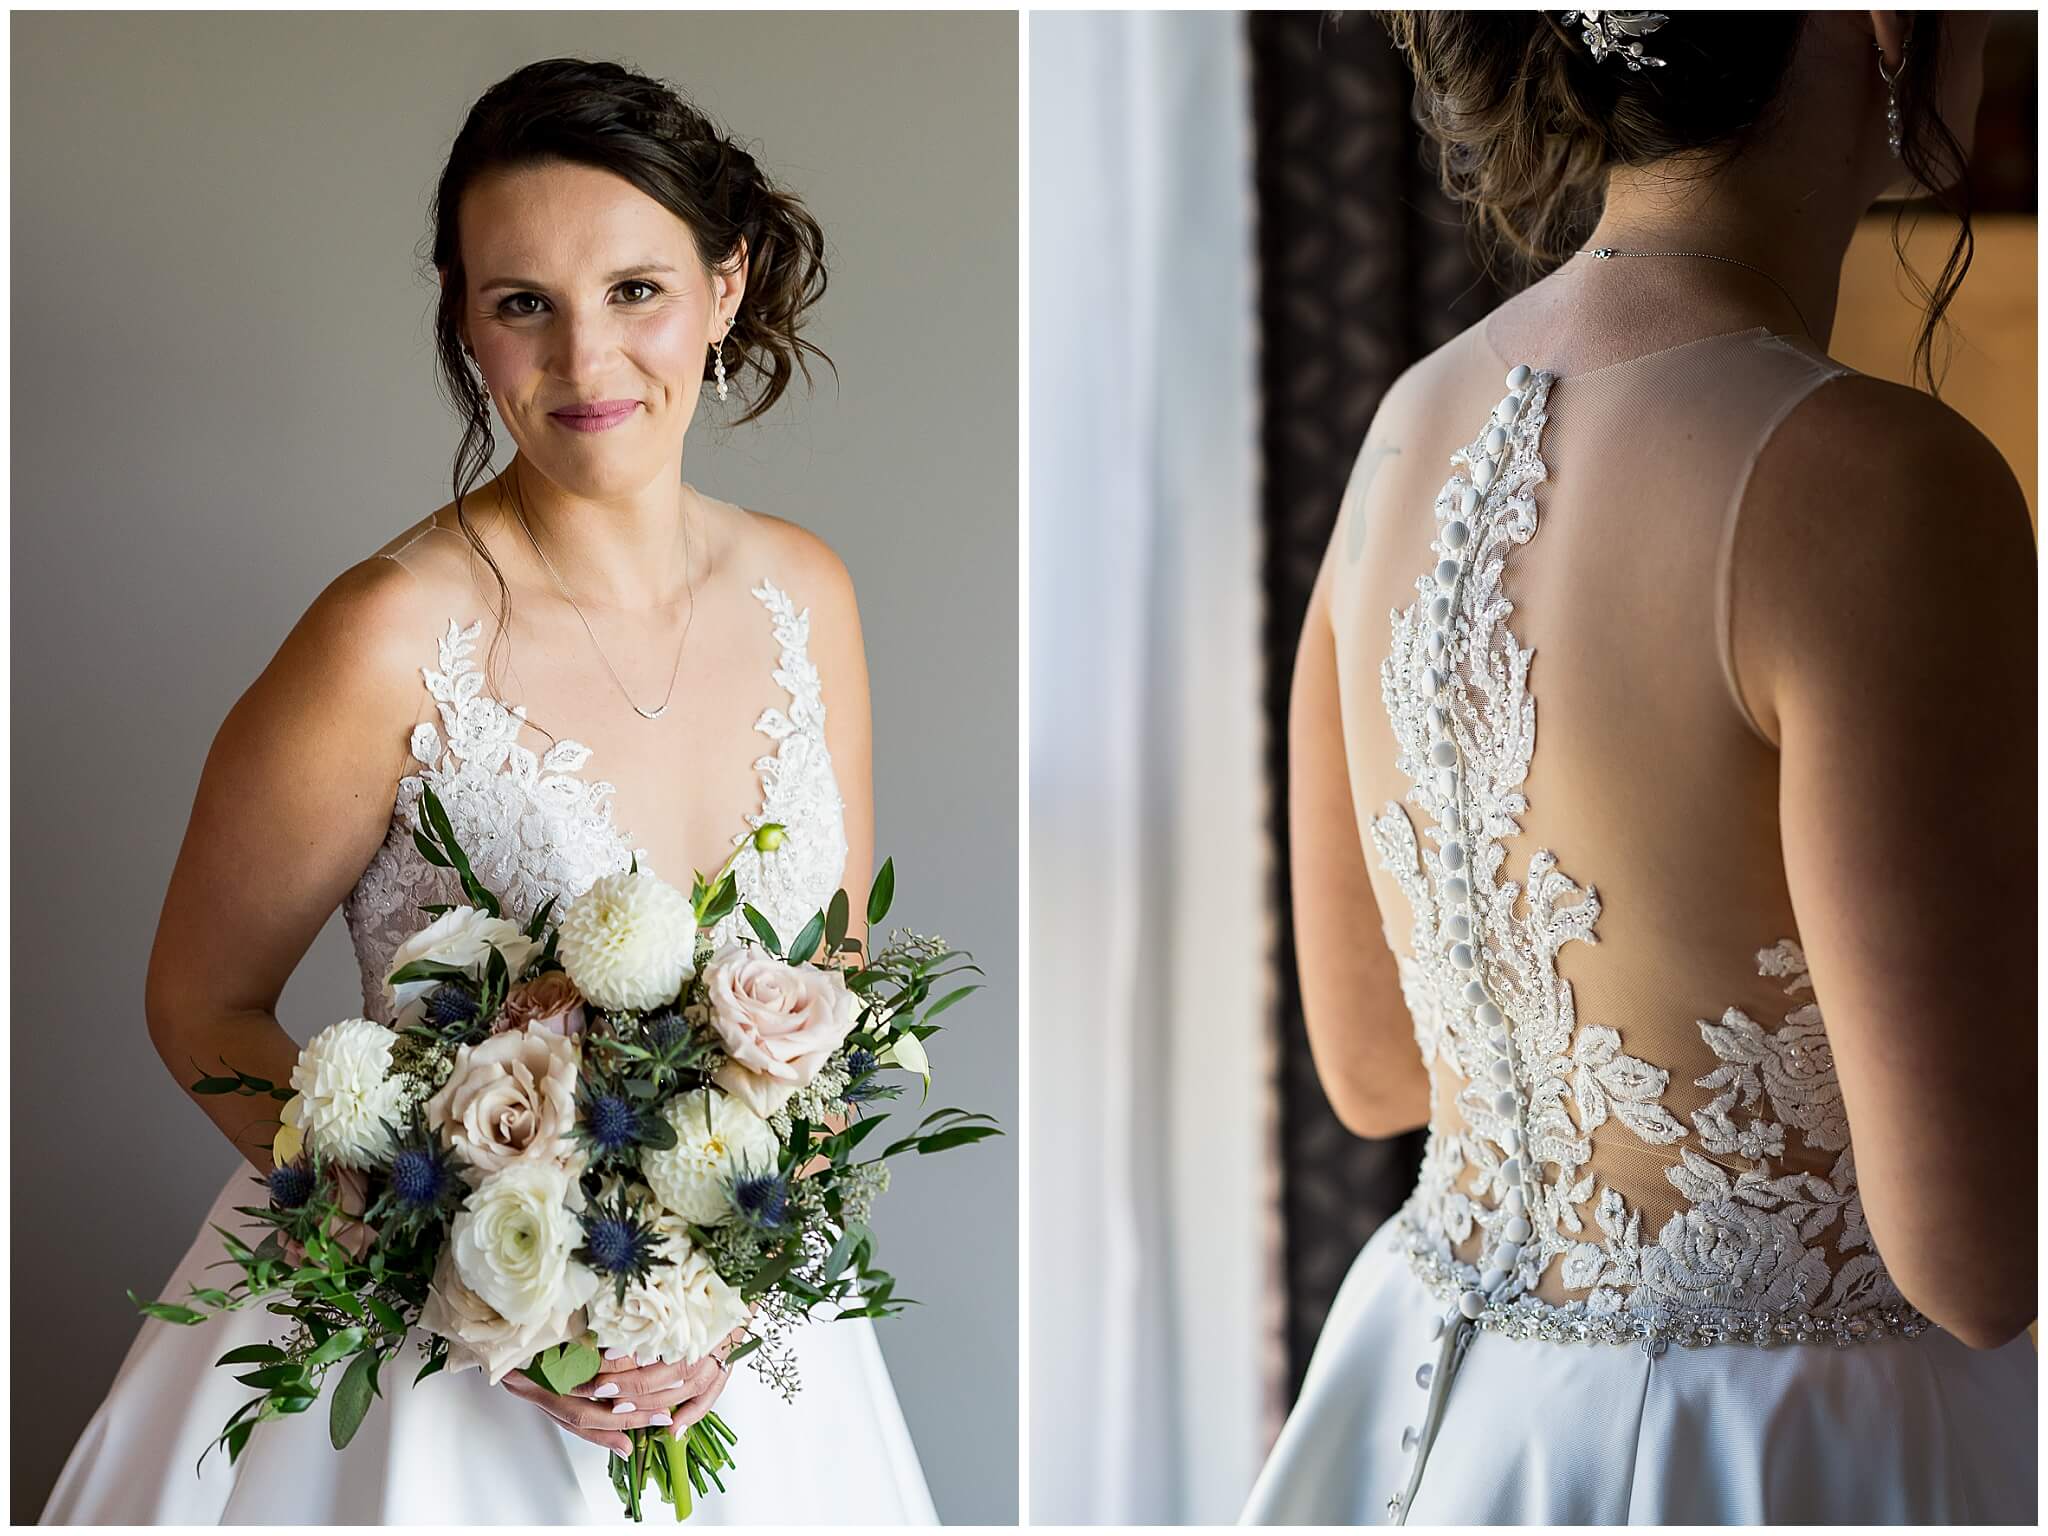 front and rear details of a bride's wedding gown as she gets ready for wedding at The Marshes wedding venue